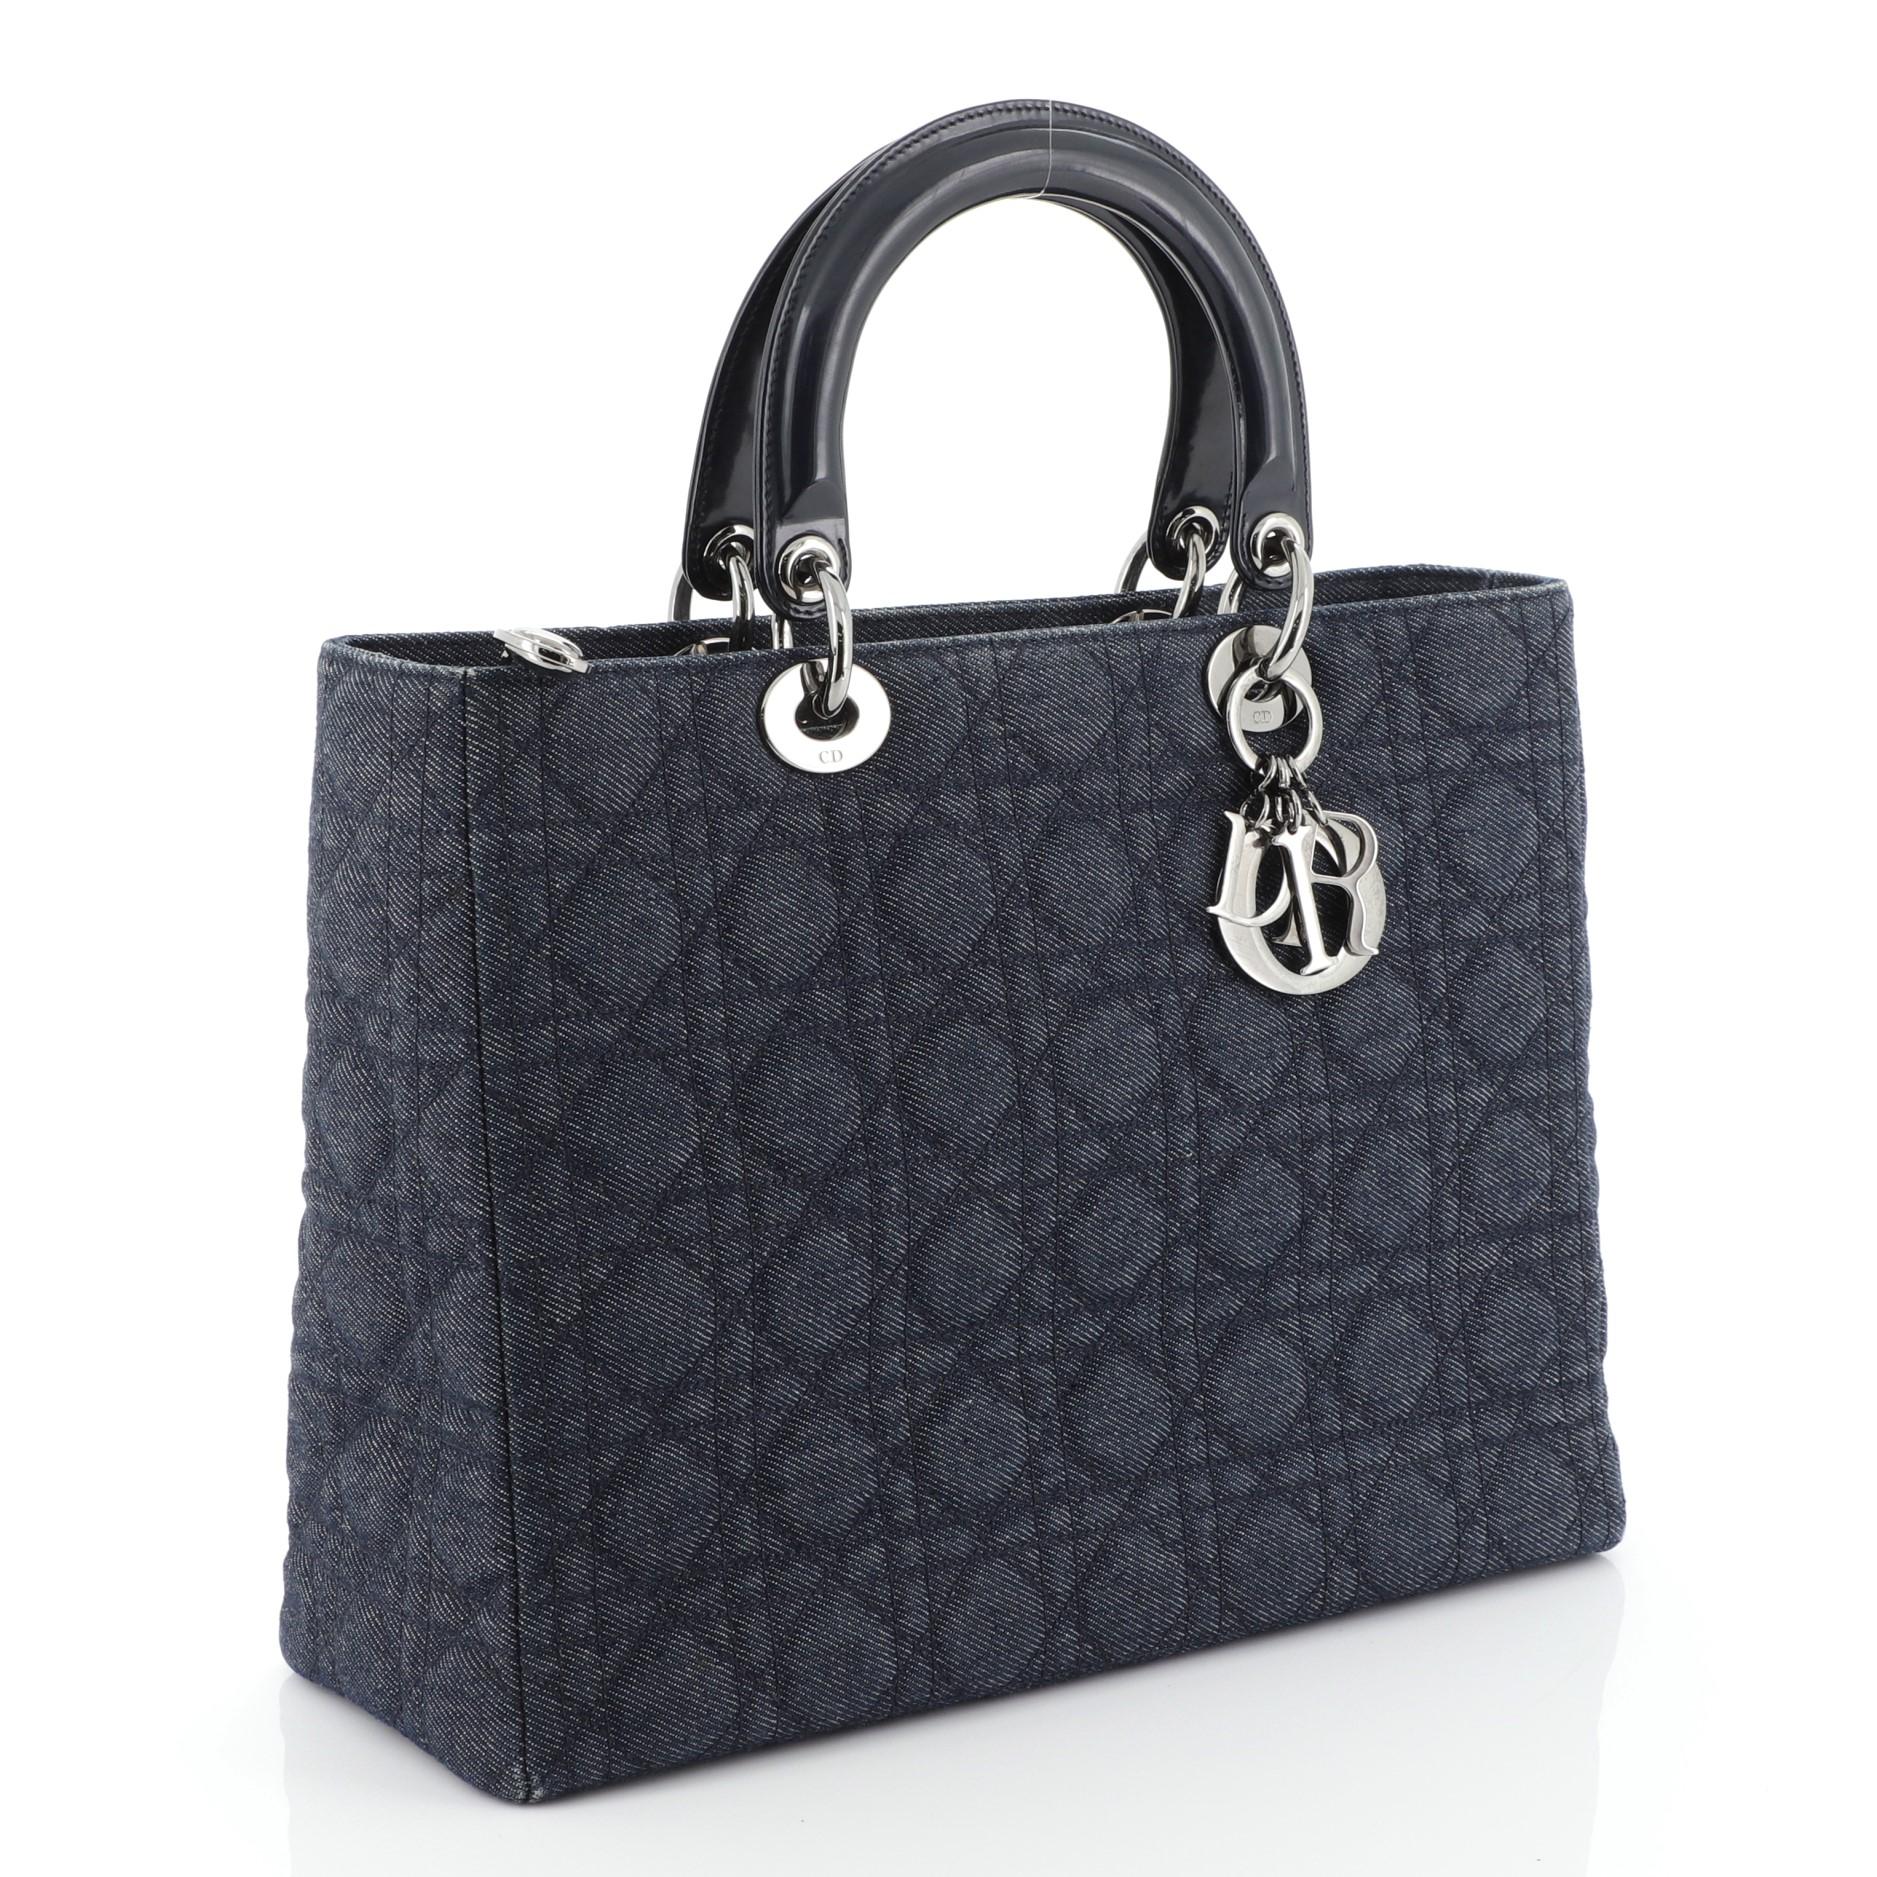 This Christian Dior Vintage Lady Dior Bag Cannage Quilt Denim Large, crafted from blue cannage quilted denim, features transparent double handles with sleek Dior charms, and gunmetal-tone hardware. Its top zip closure opens to a blue fabric-lined